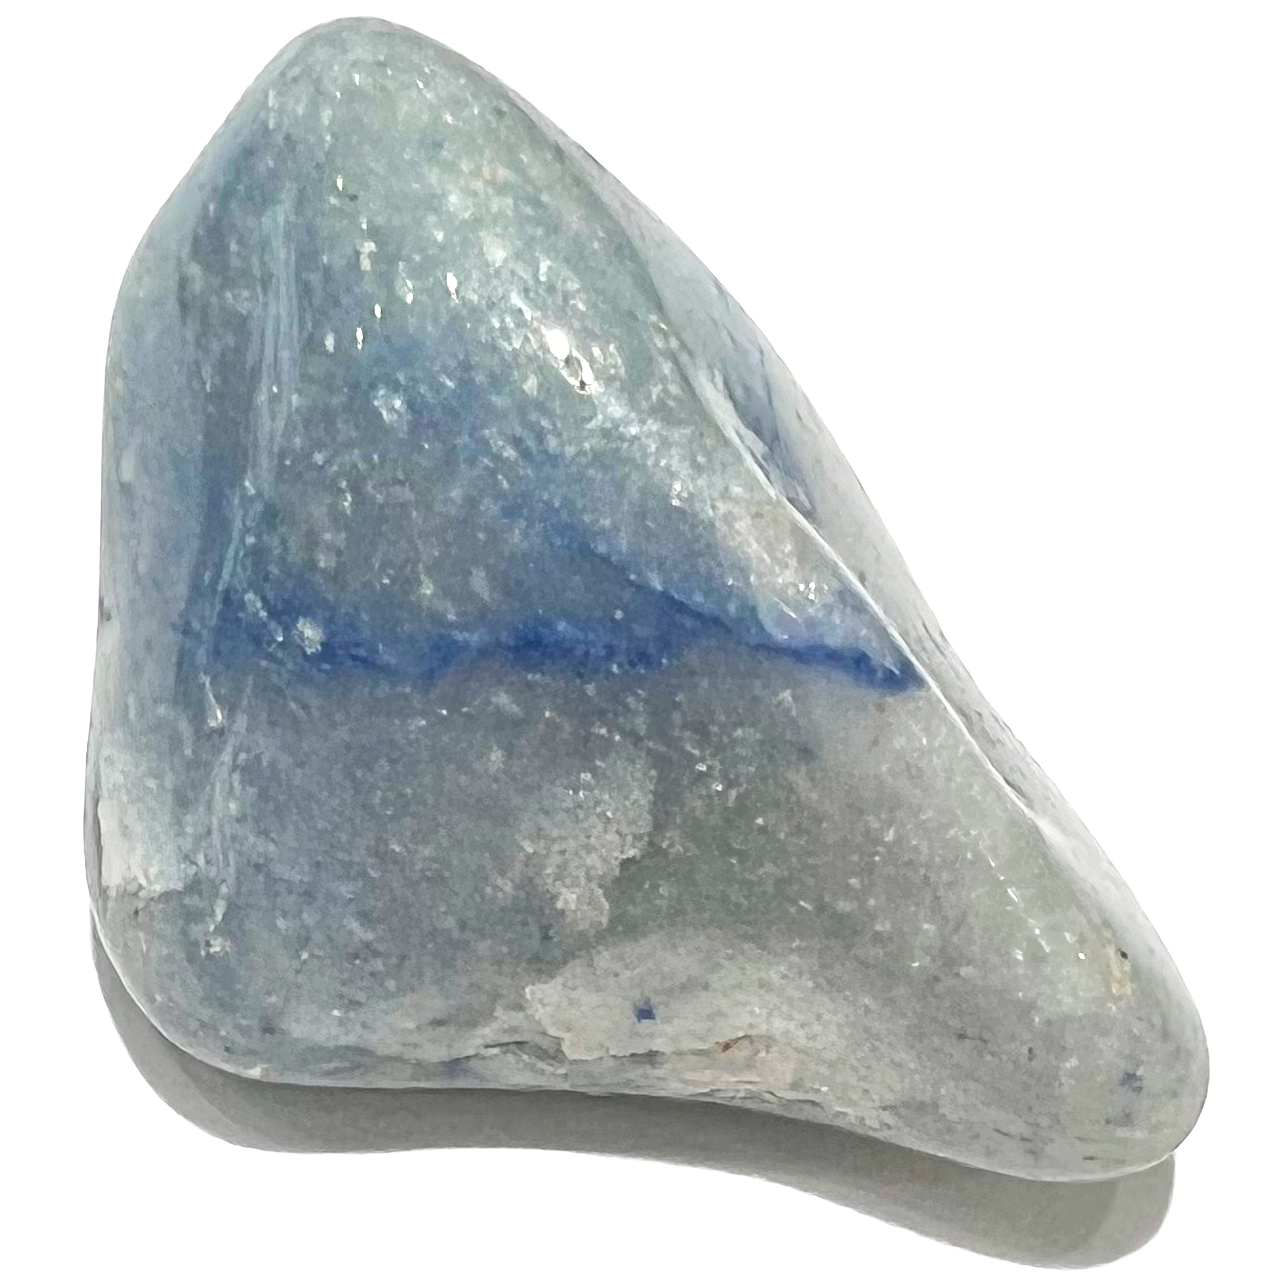 A tumble polished blue quartz stone.  The material is grayish white with blue veins.